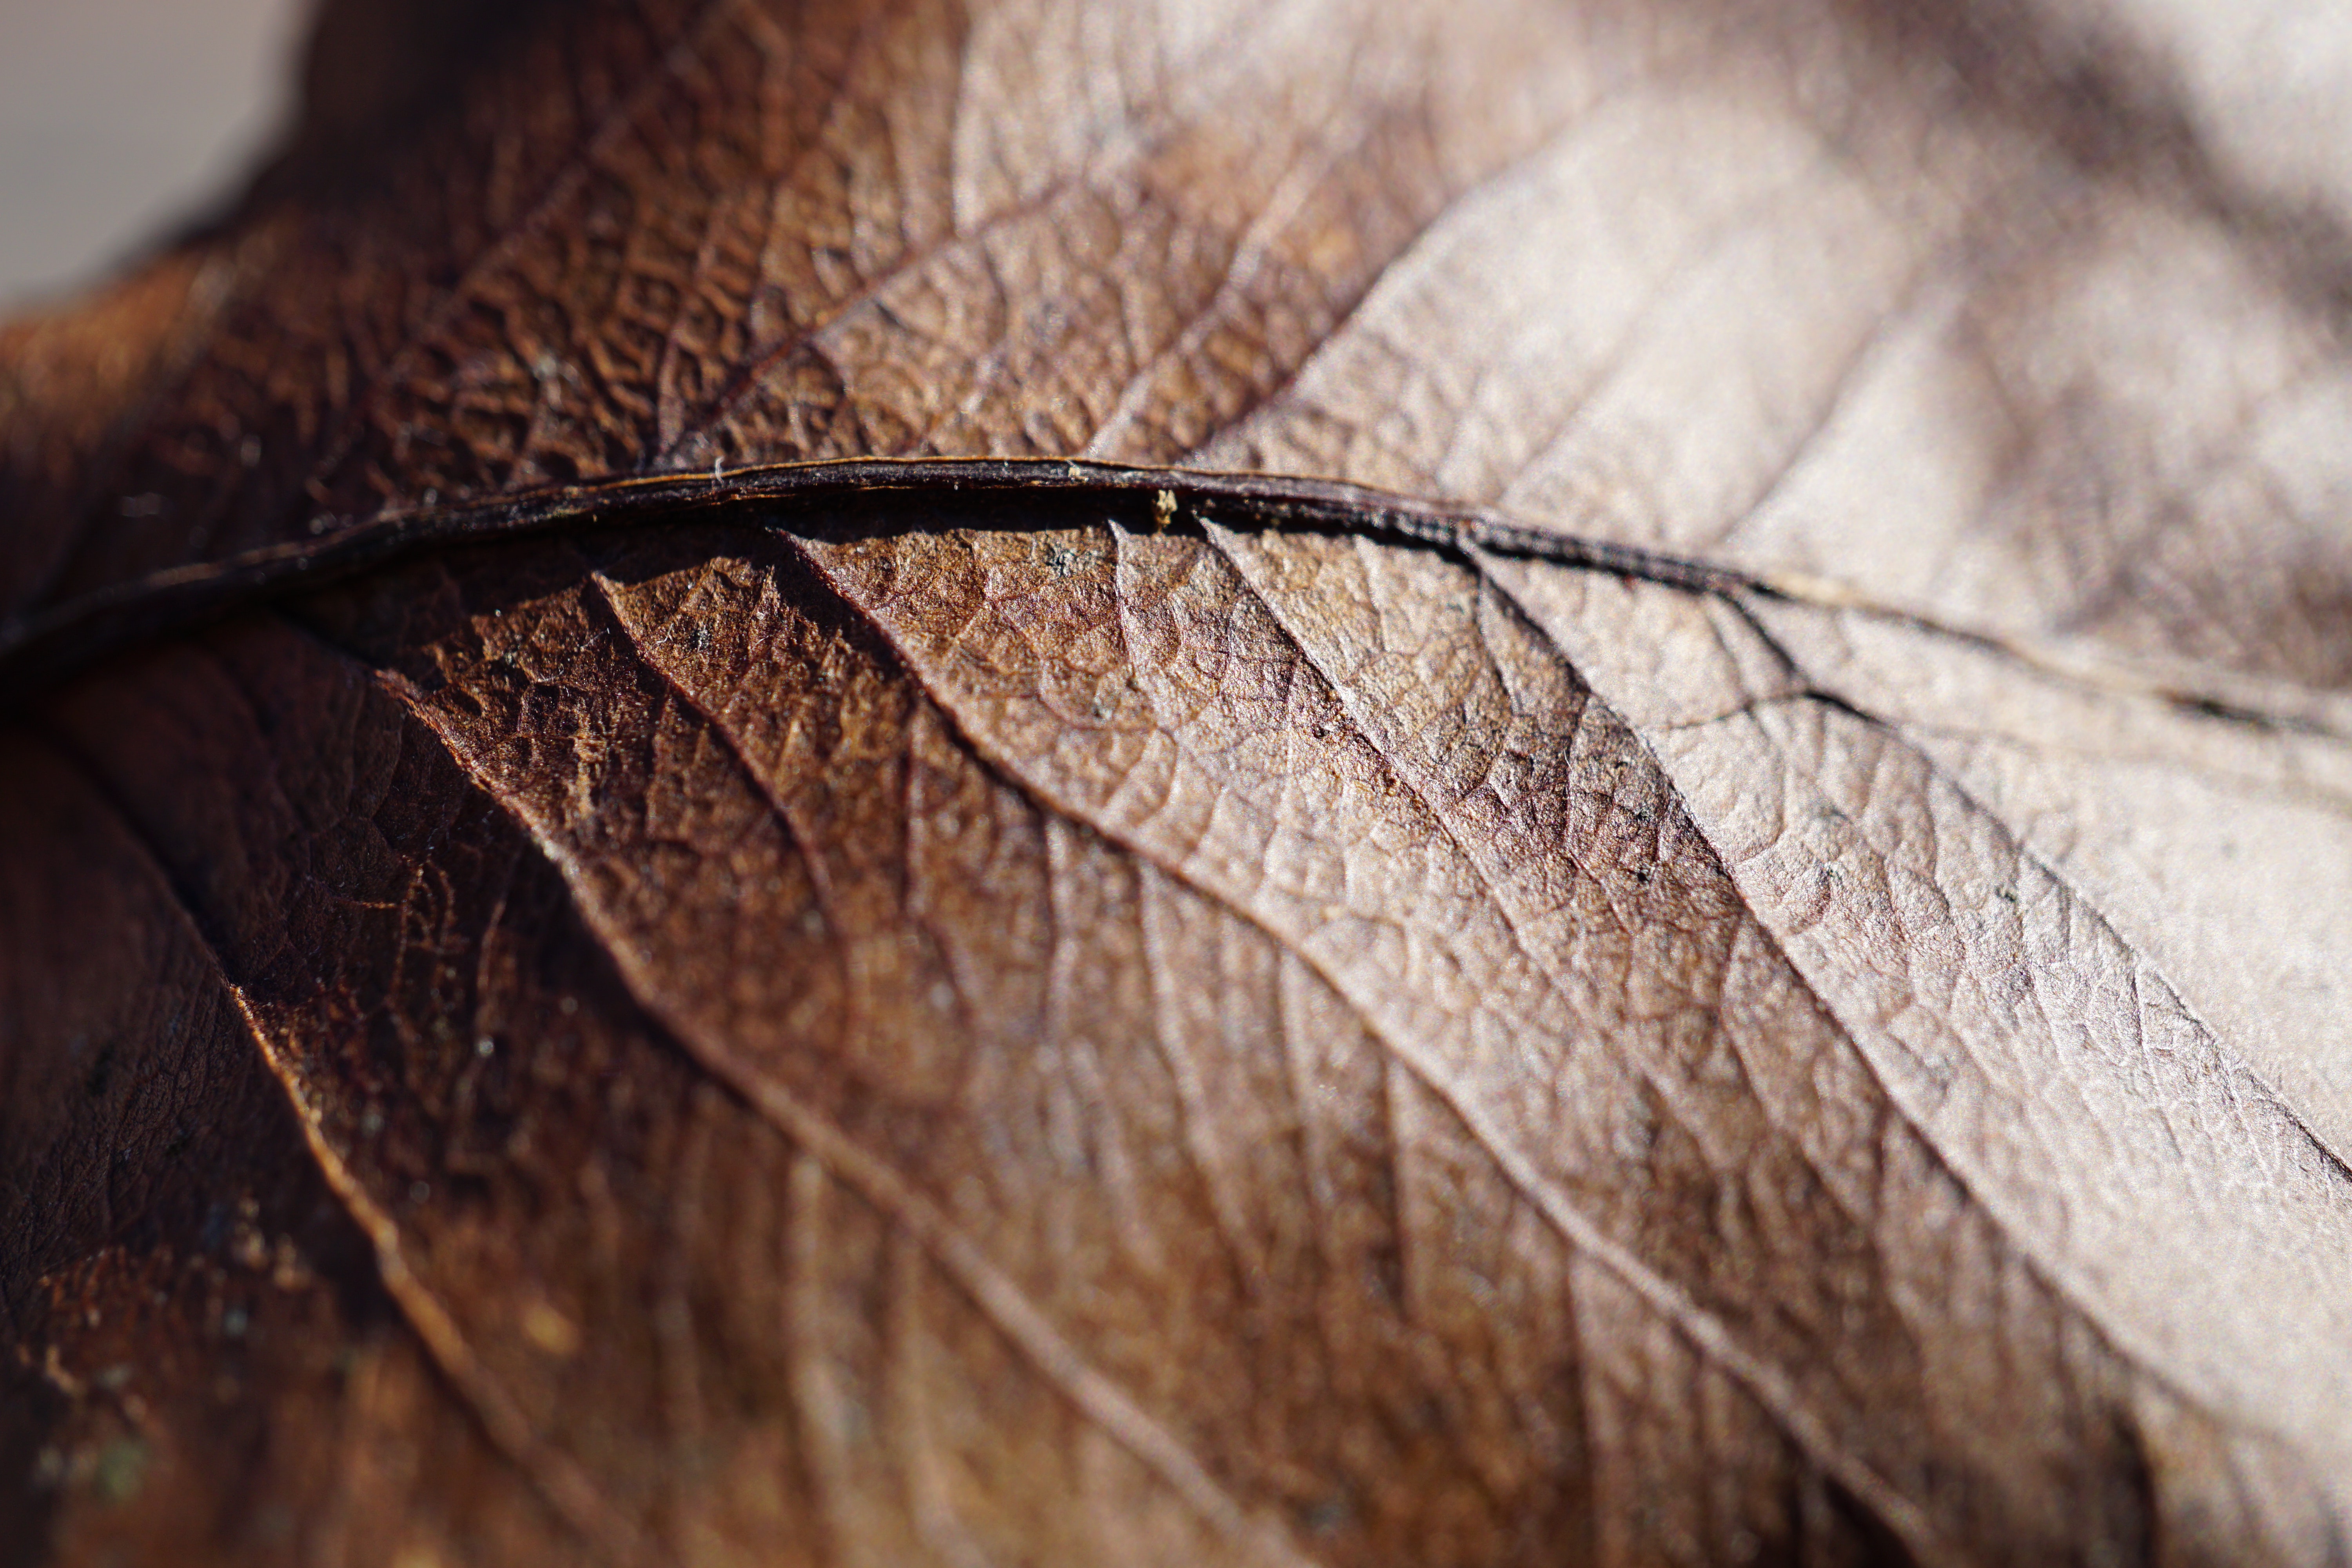 A close up photograph of the texture of a dry leaf.